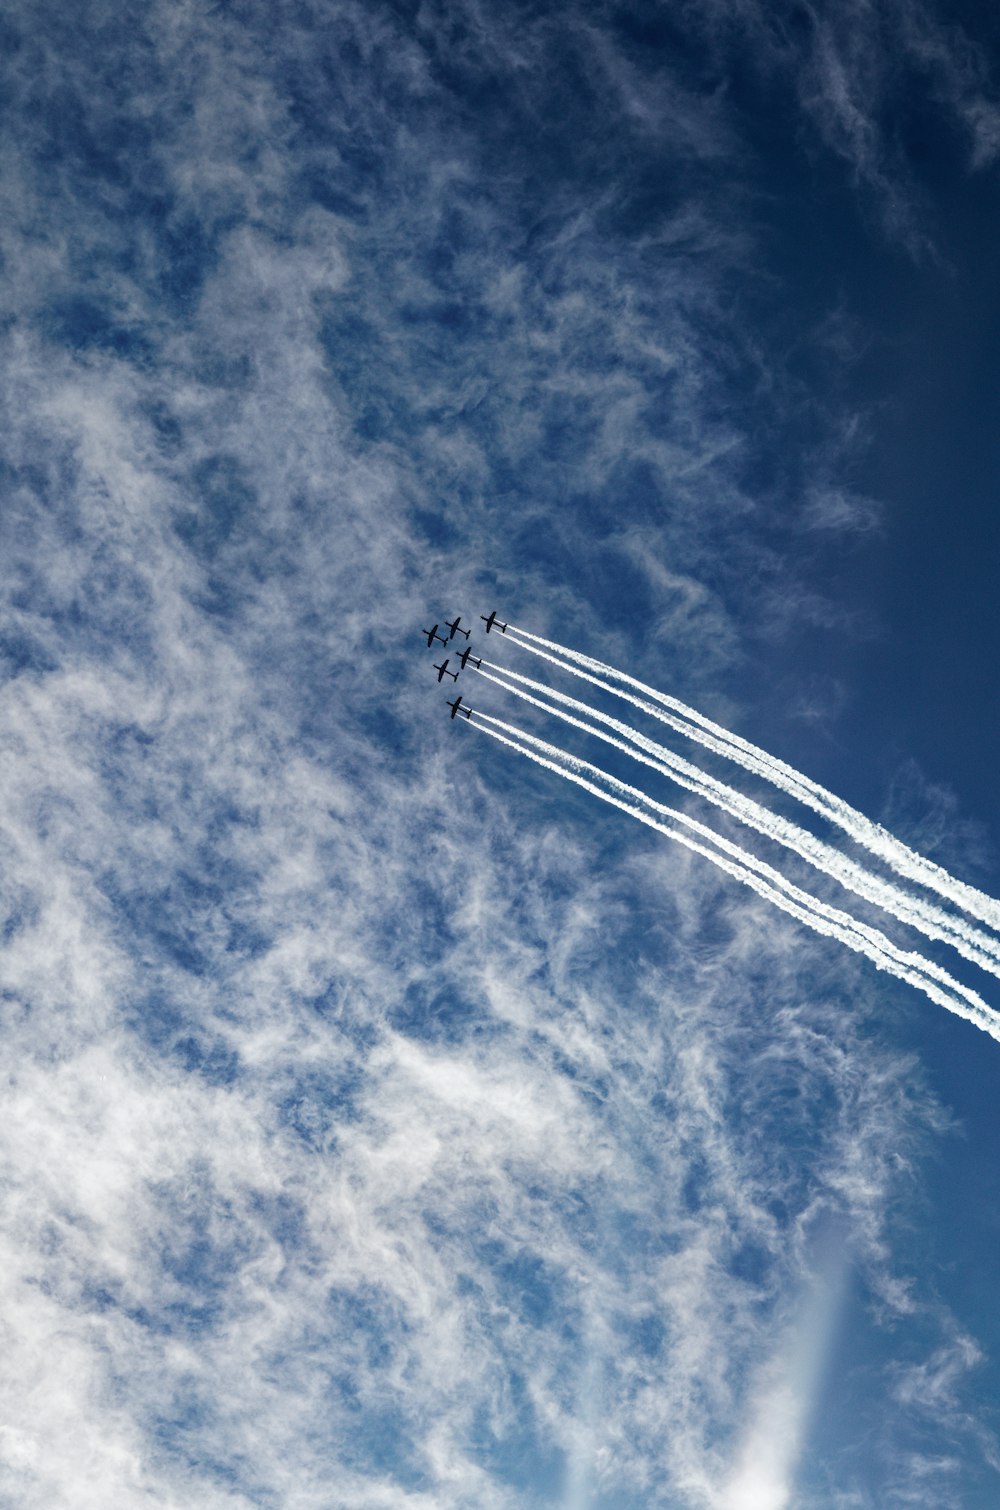 a group of airplanes flying through a cloudy blue sky